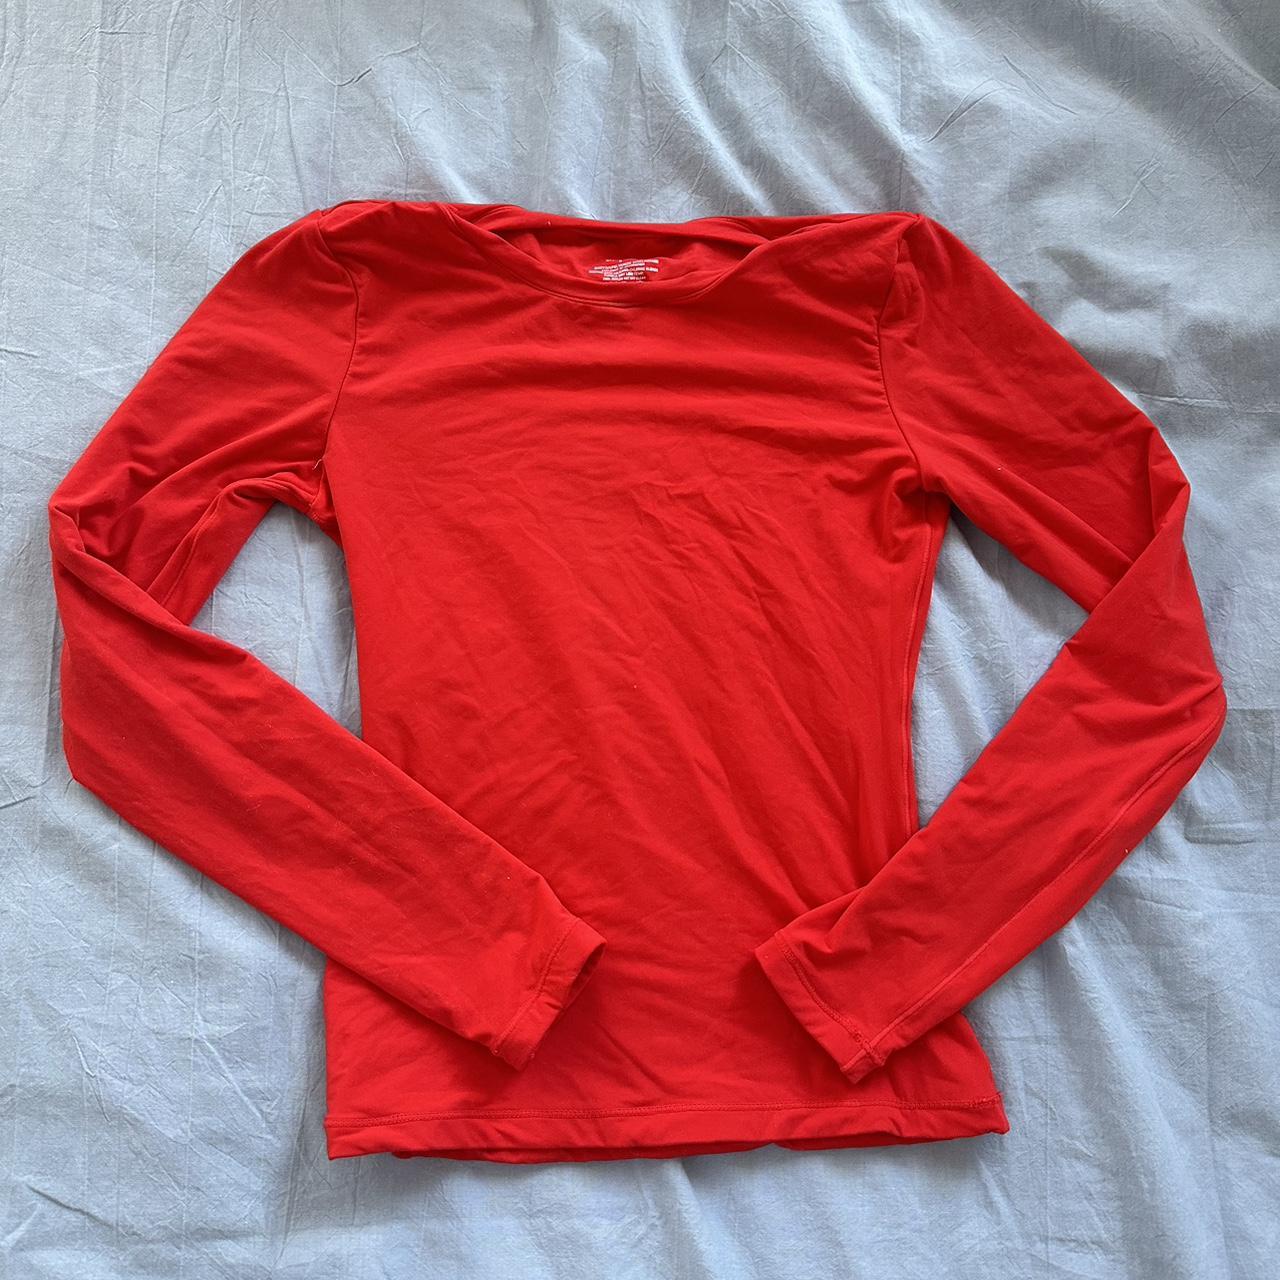 Skims-like red top from Amazon Size small but firs... - Depop